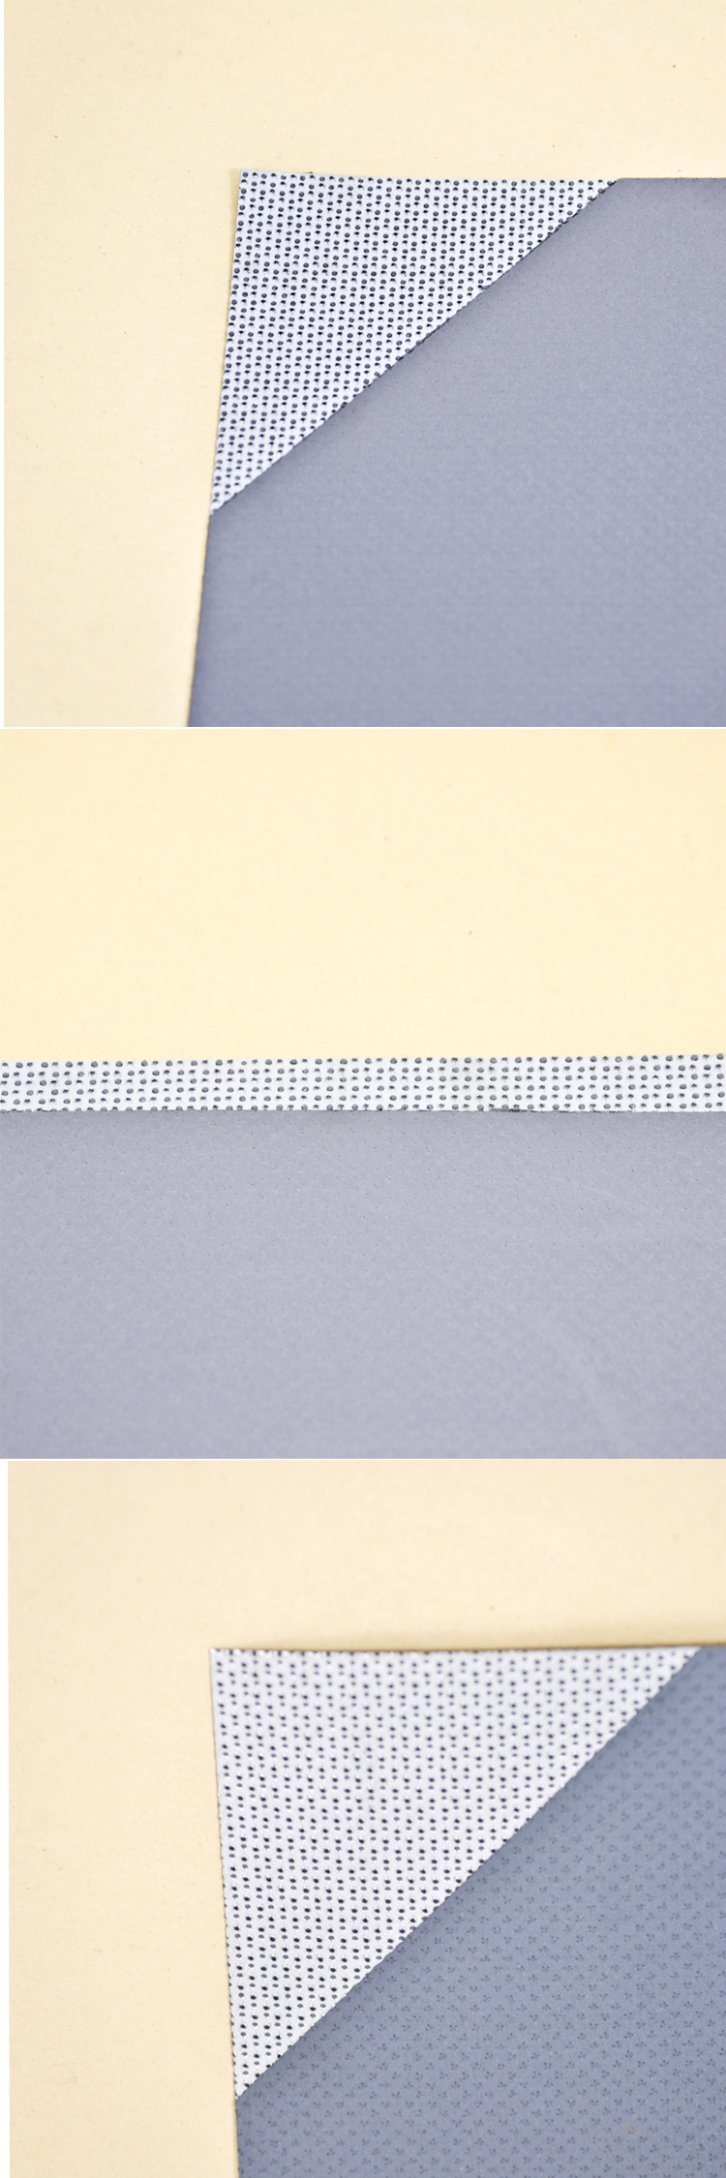 2.0 mm Reinforced Non Asbestos Gasket Sheet with Metal